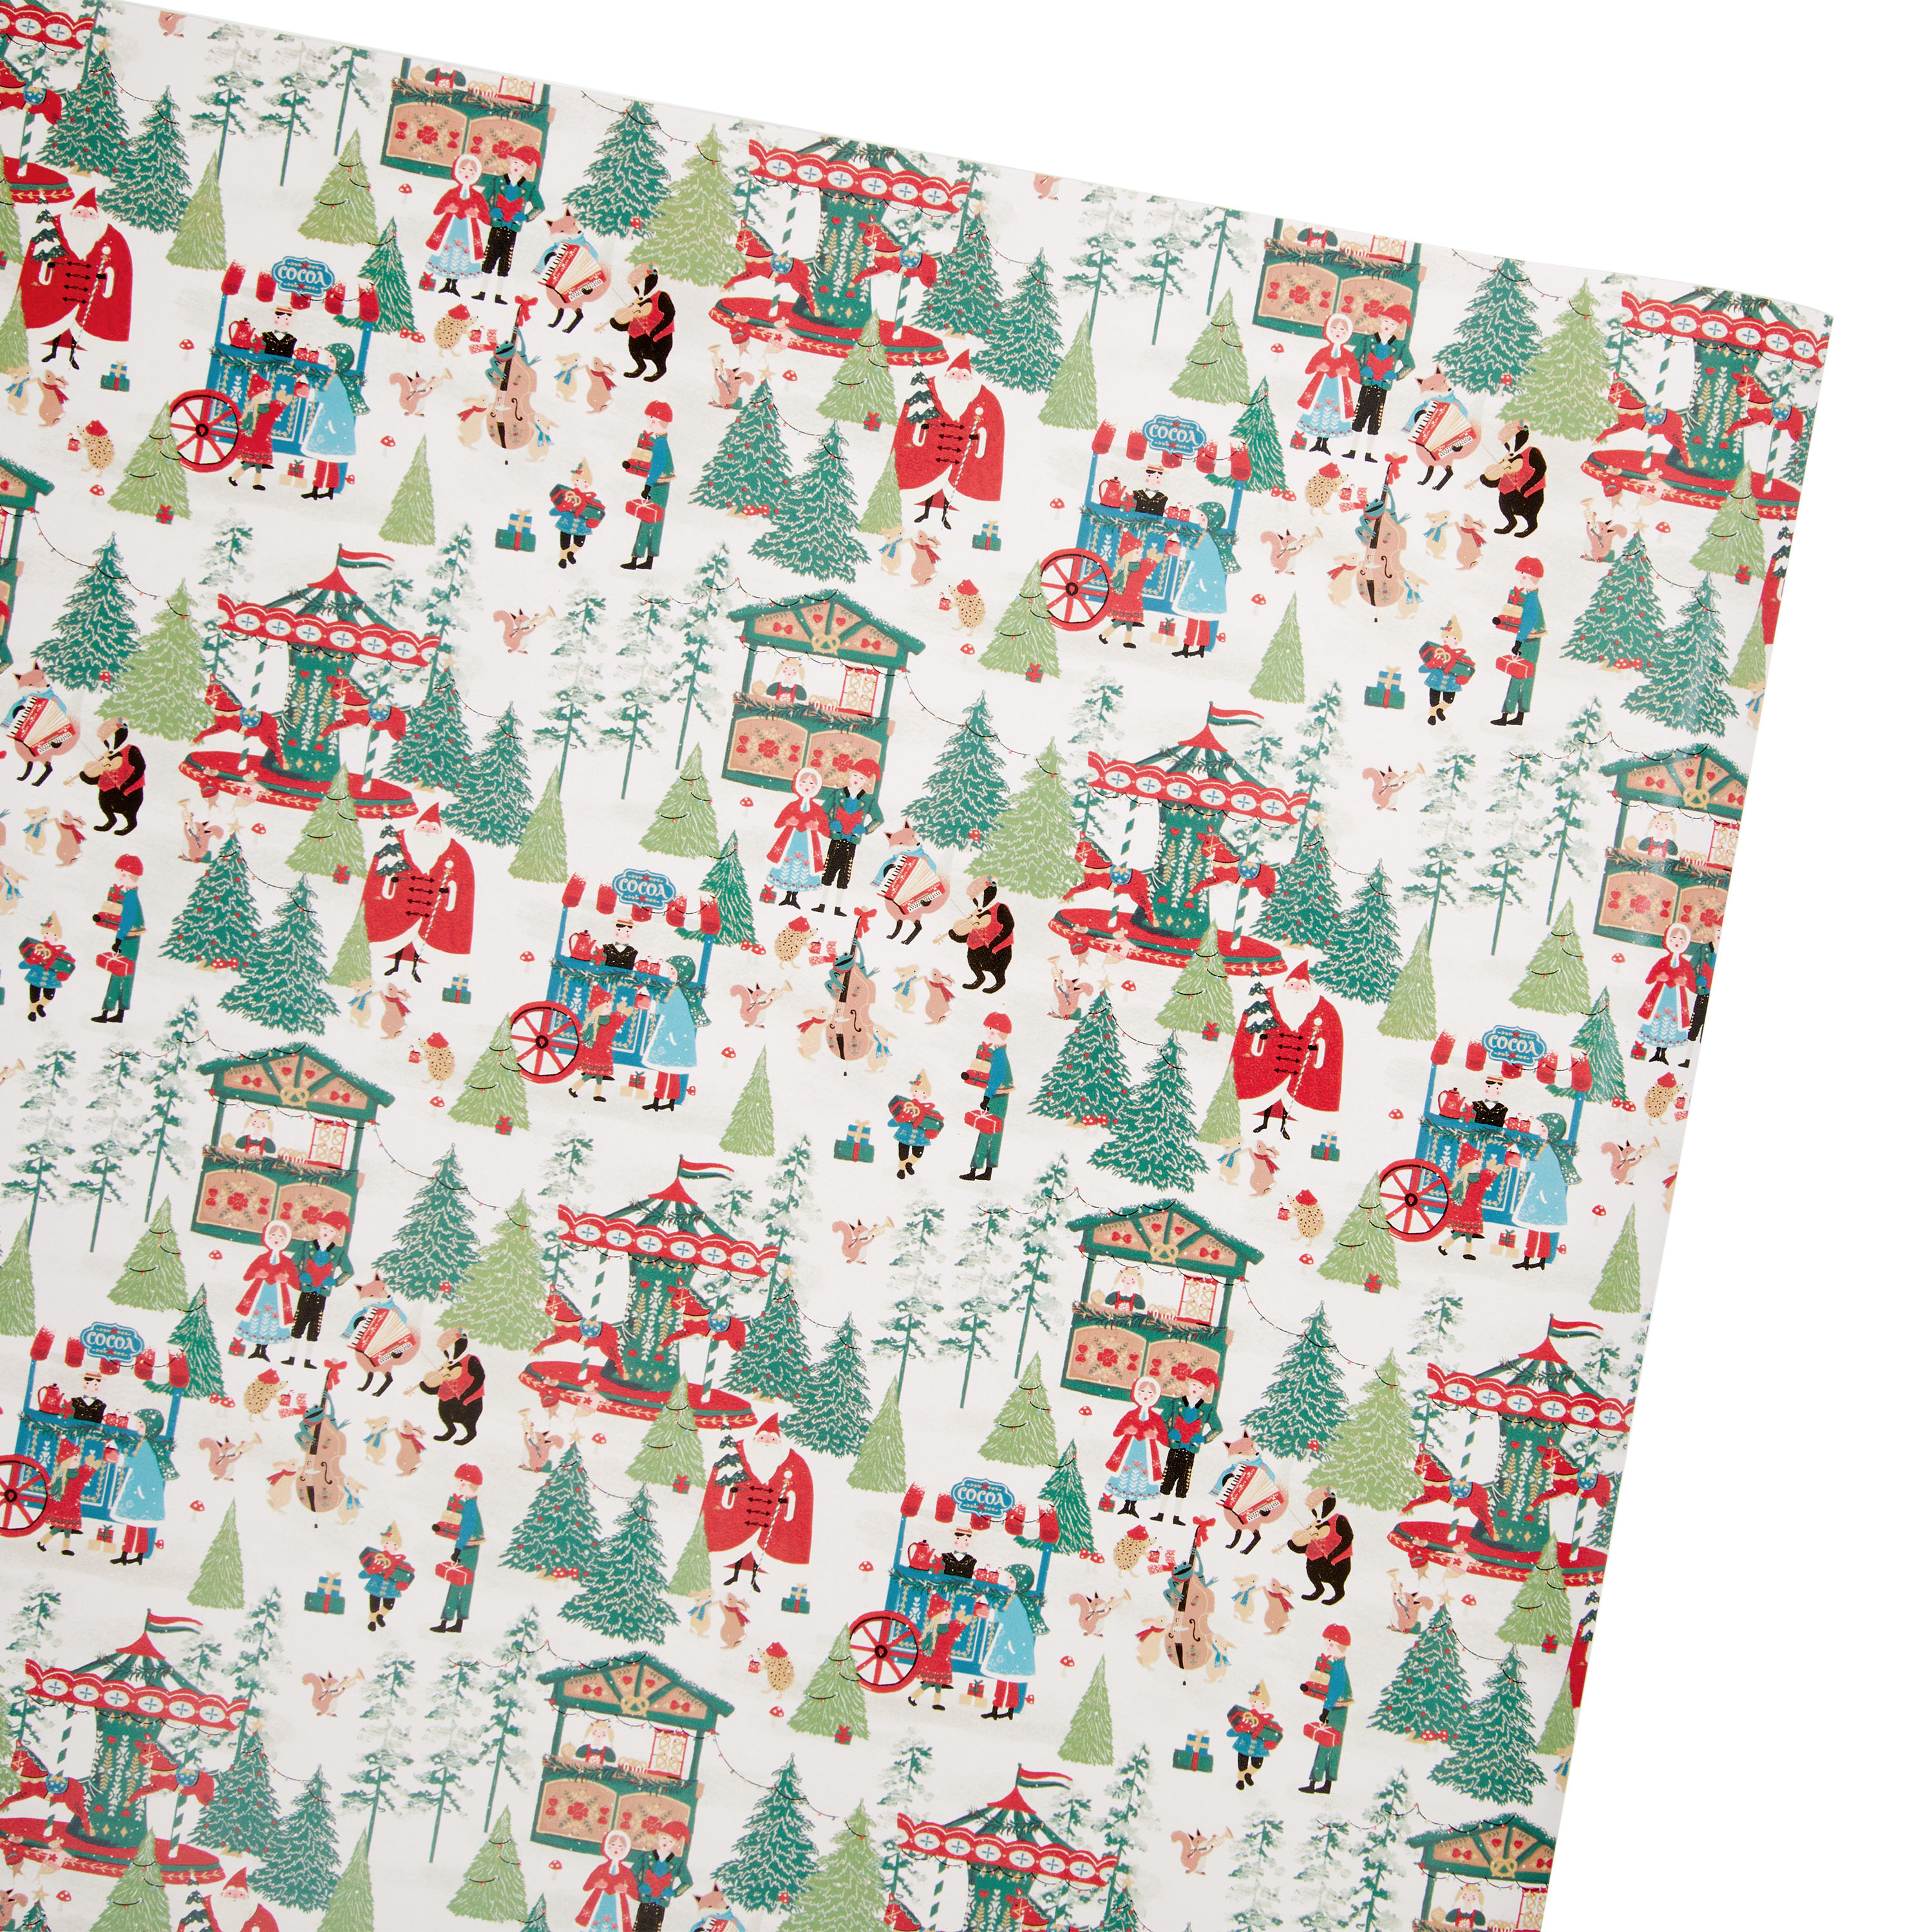 Vintage Mushroom Decorative Christmas Wrapping Paper | Holiday Paper |  Gifts for Wildcrafter | Gift for Mushroom Lover | Nature Paper | Natural  Gift